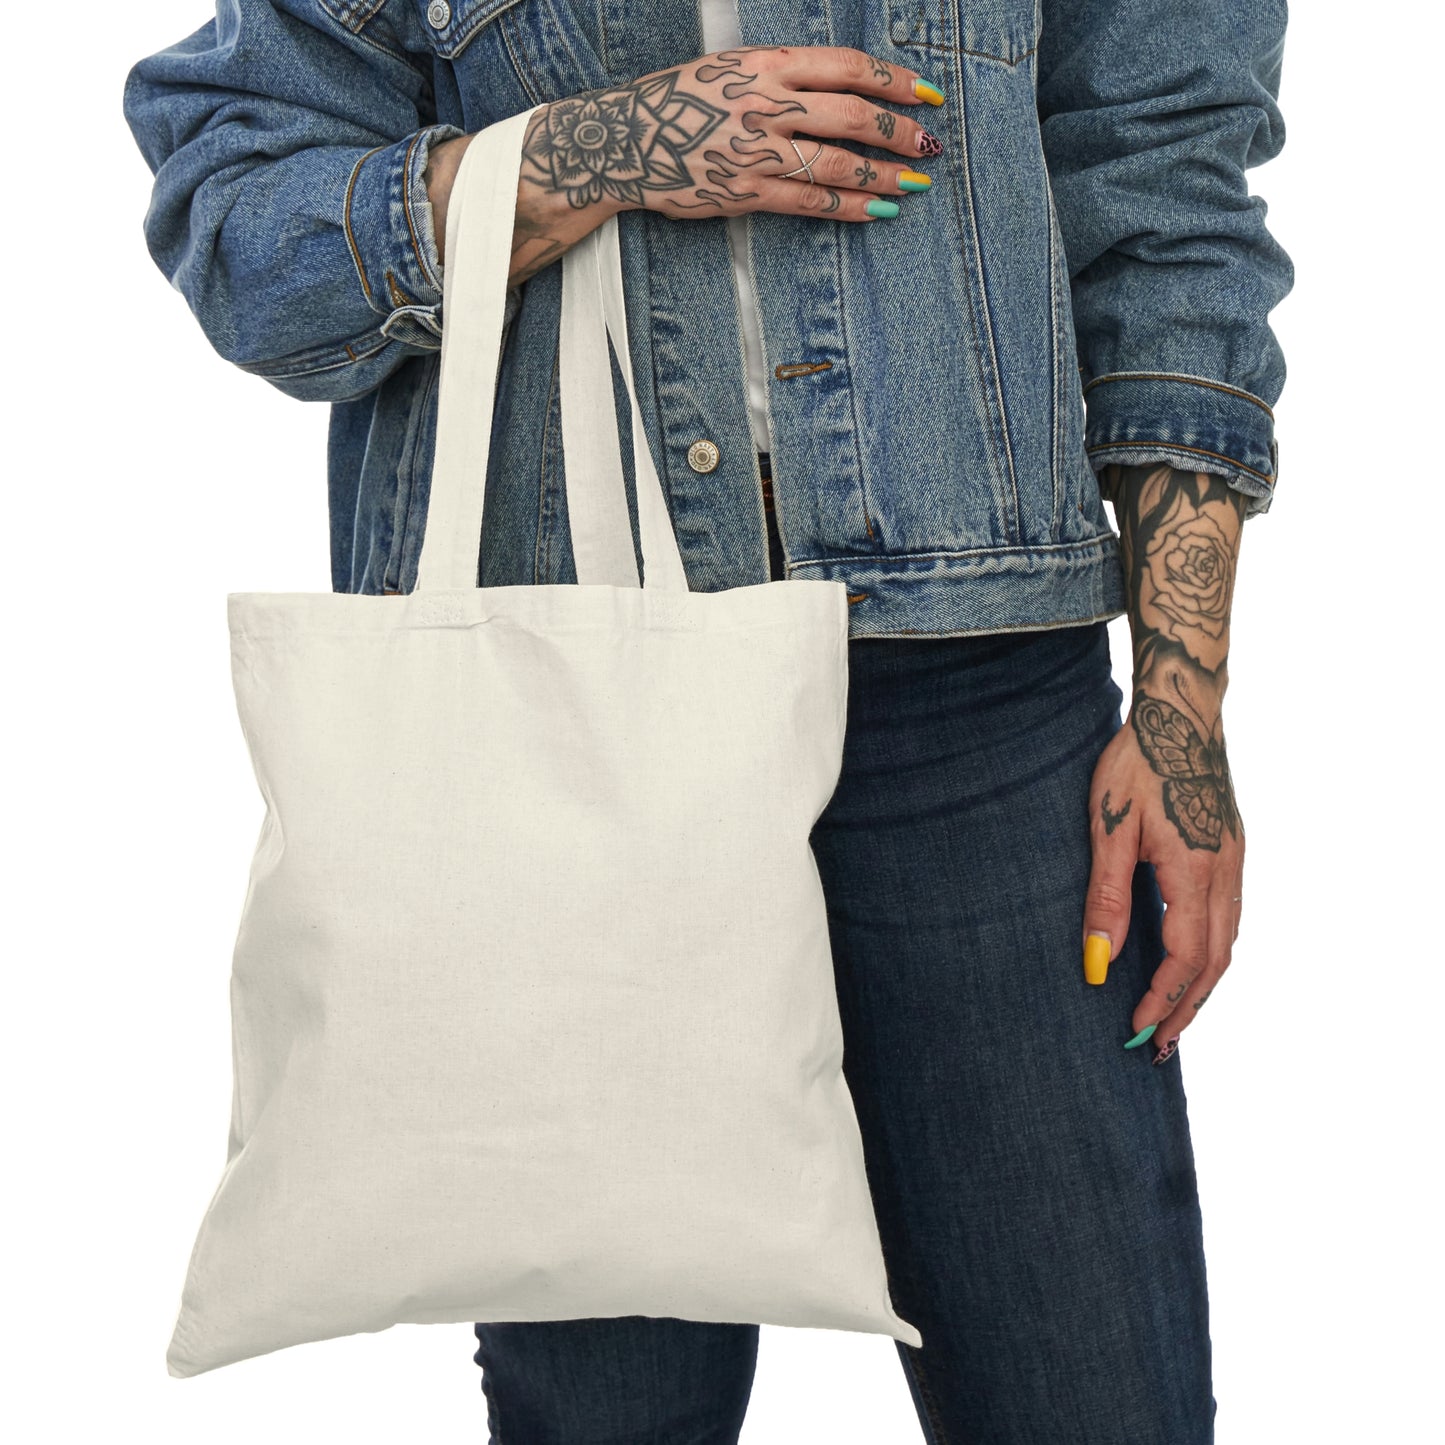 One Core Belief - Natural Tote Bag